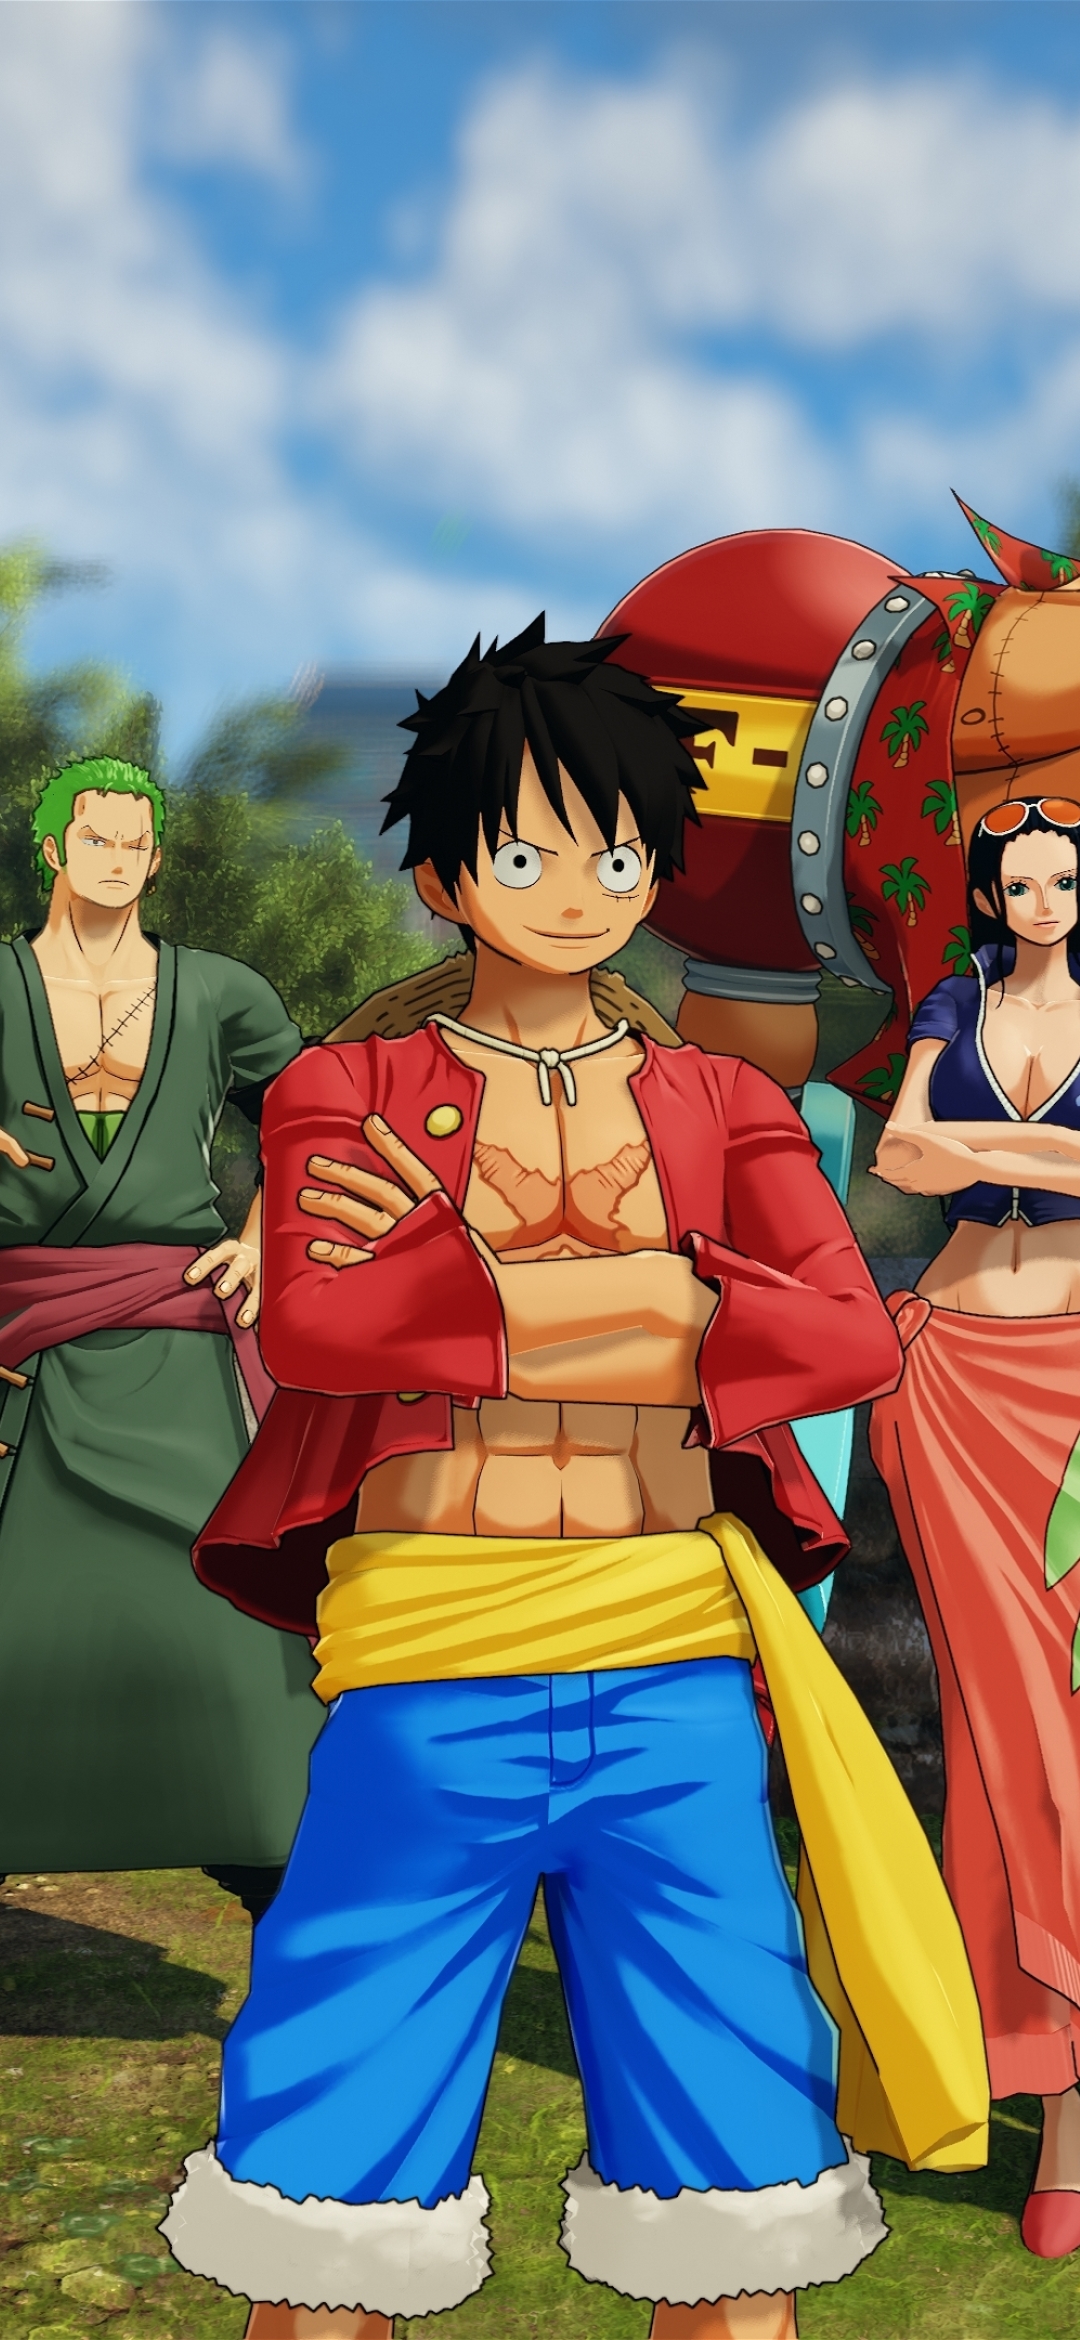 Wallpaper 4K Phone Anime One Piece - One Piece Mobile 4K Wallpapers